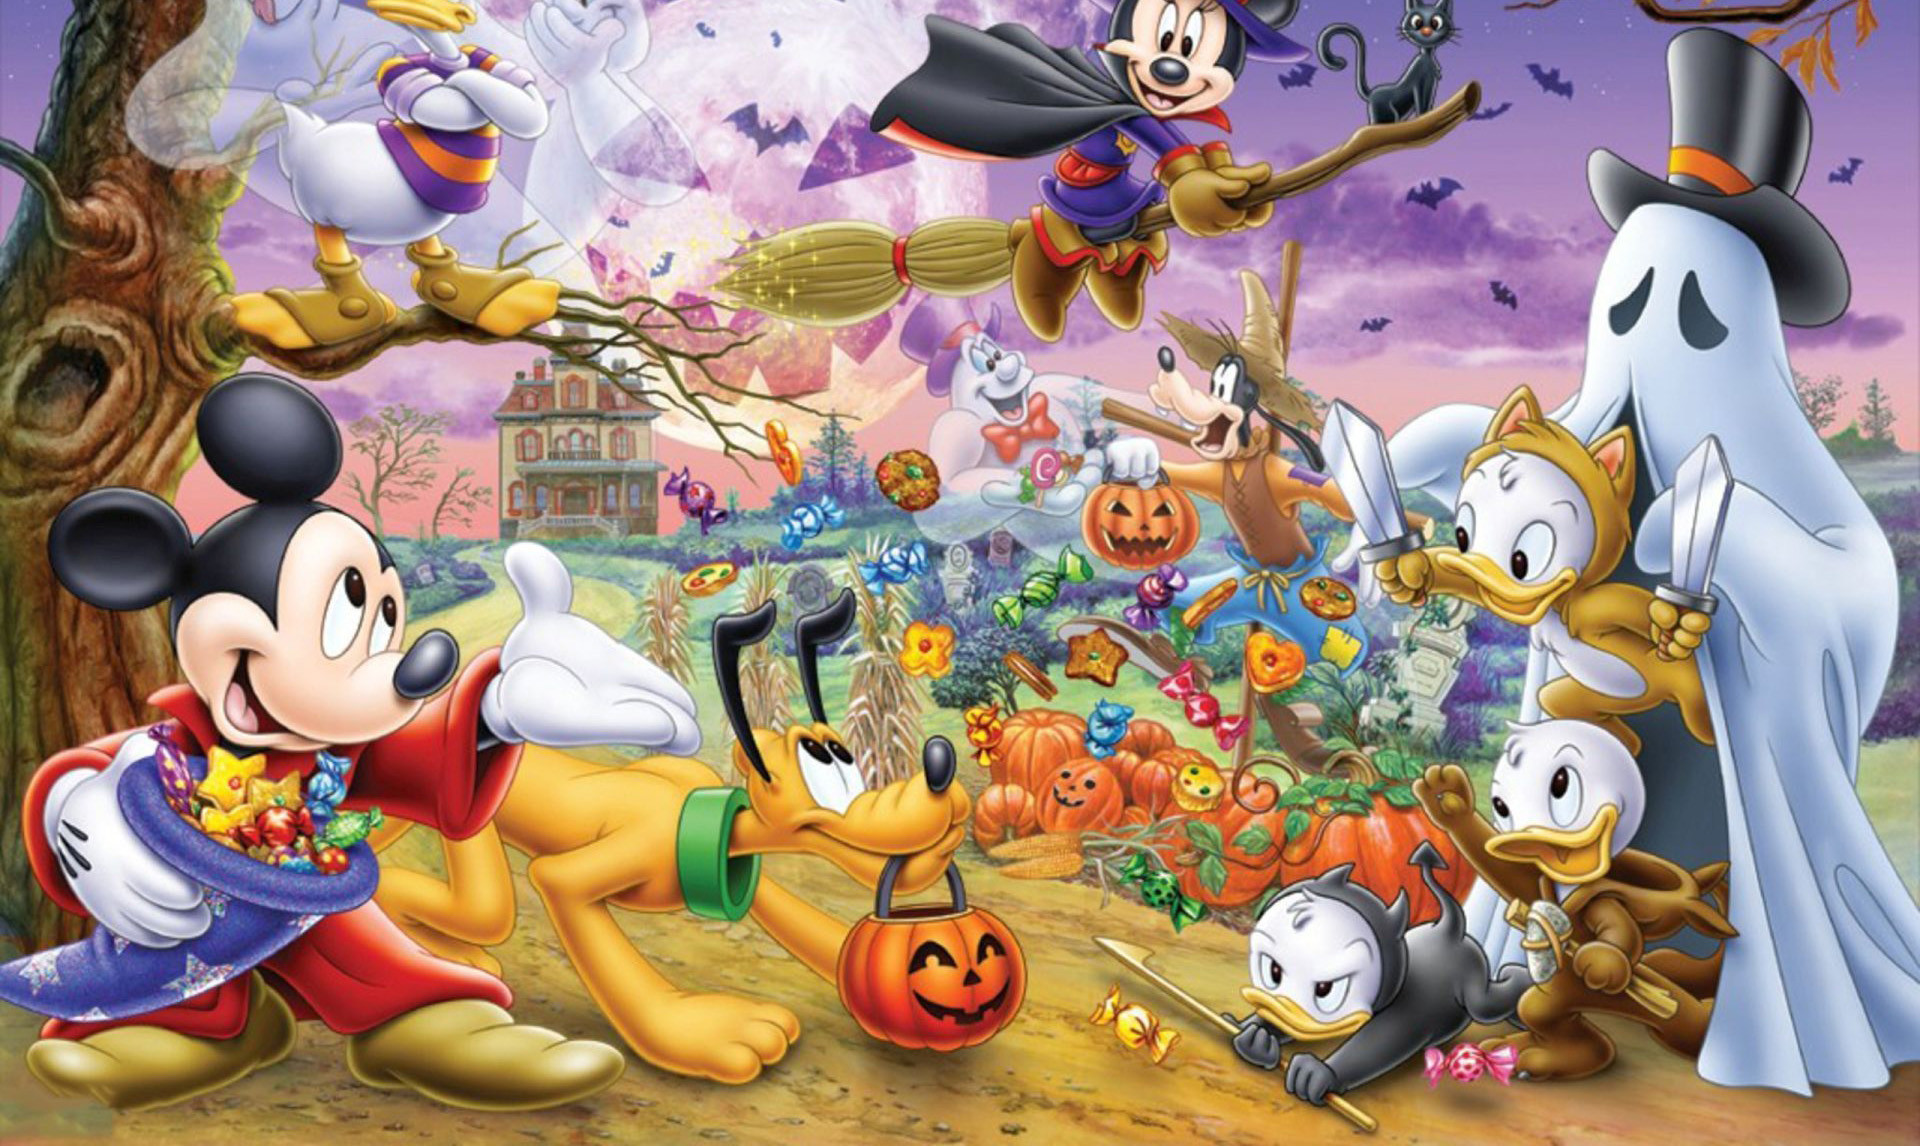 Free Download Disney Halloween Wallpaper Backgrounds 65 Images 19x1146 For Your Desktop Mobile Tablet Explore 69 Free Halloween Computer Wallpaper Backgrounds Free Halloween Desktop Wallpapers Animated Halloween Wallpaper And